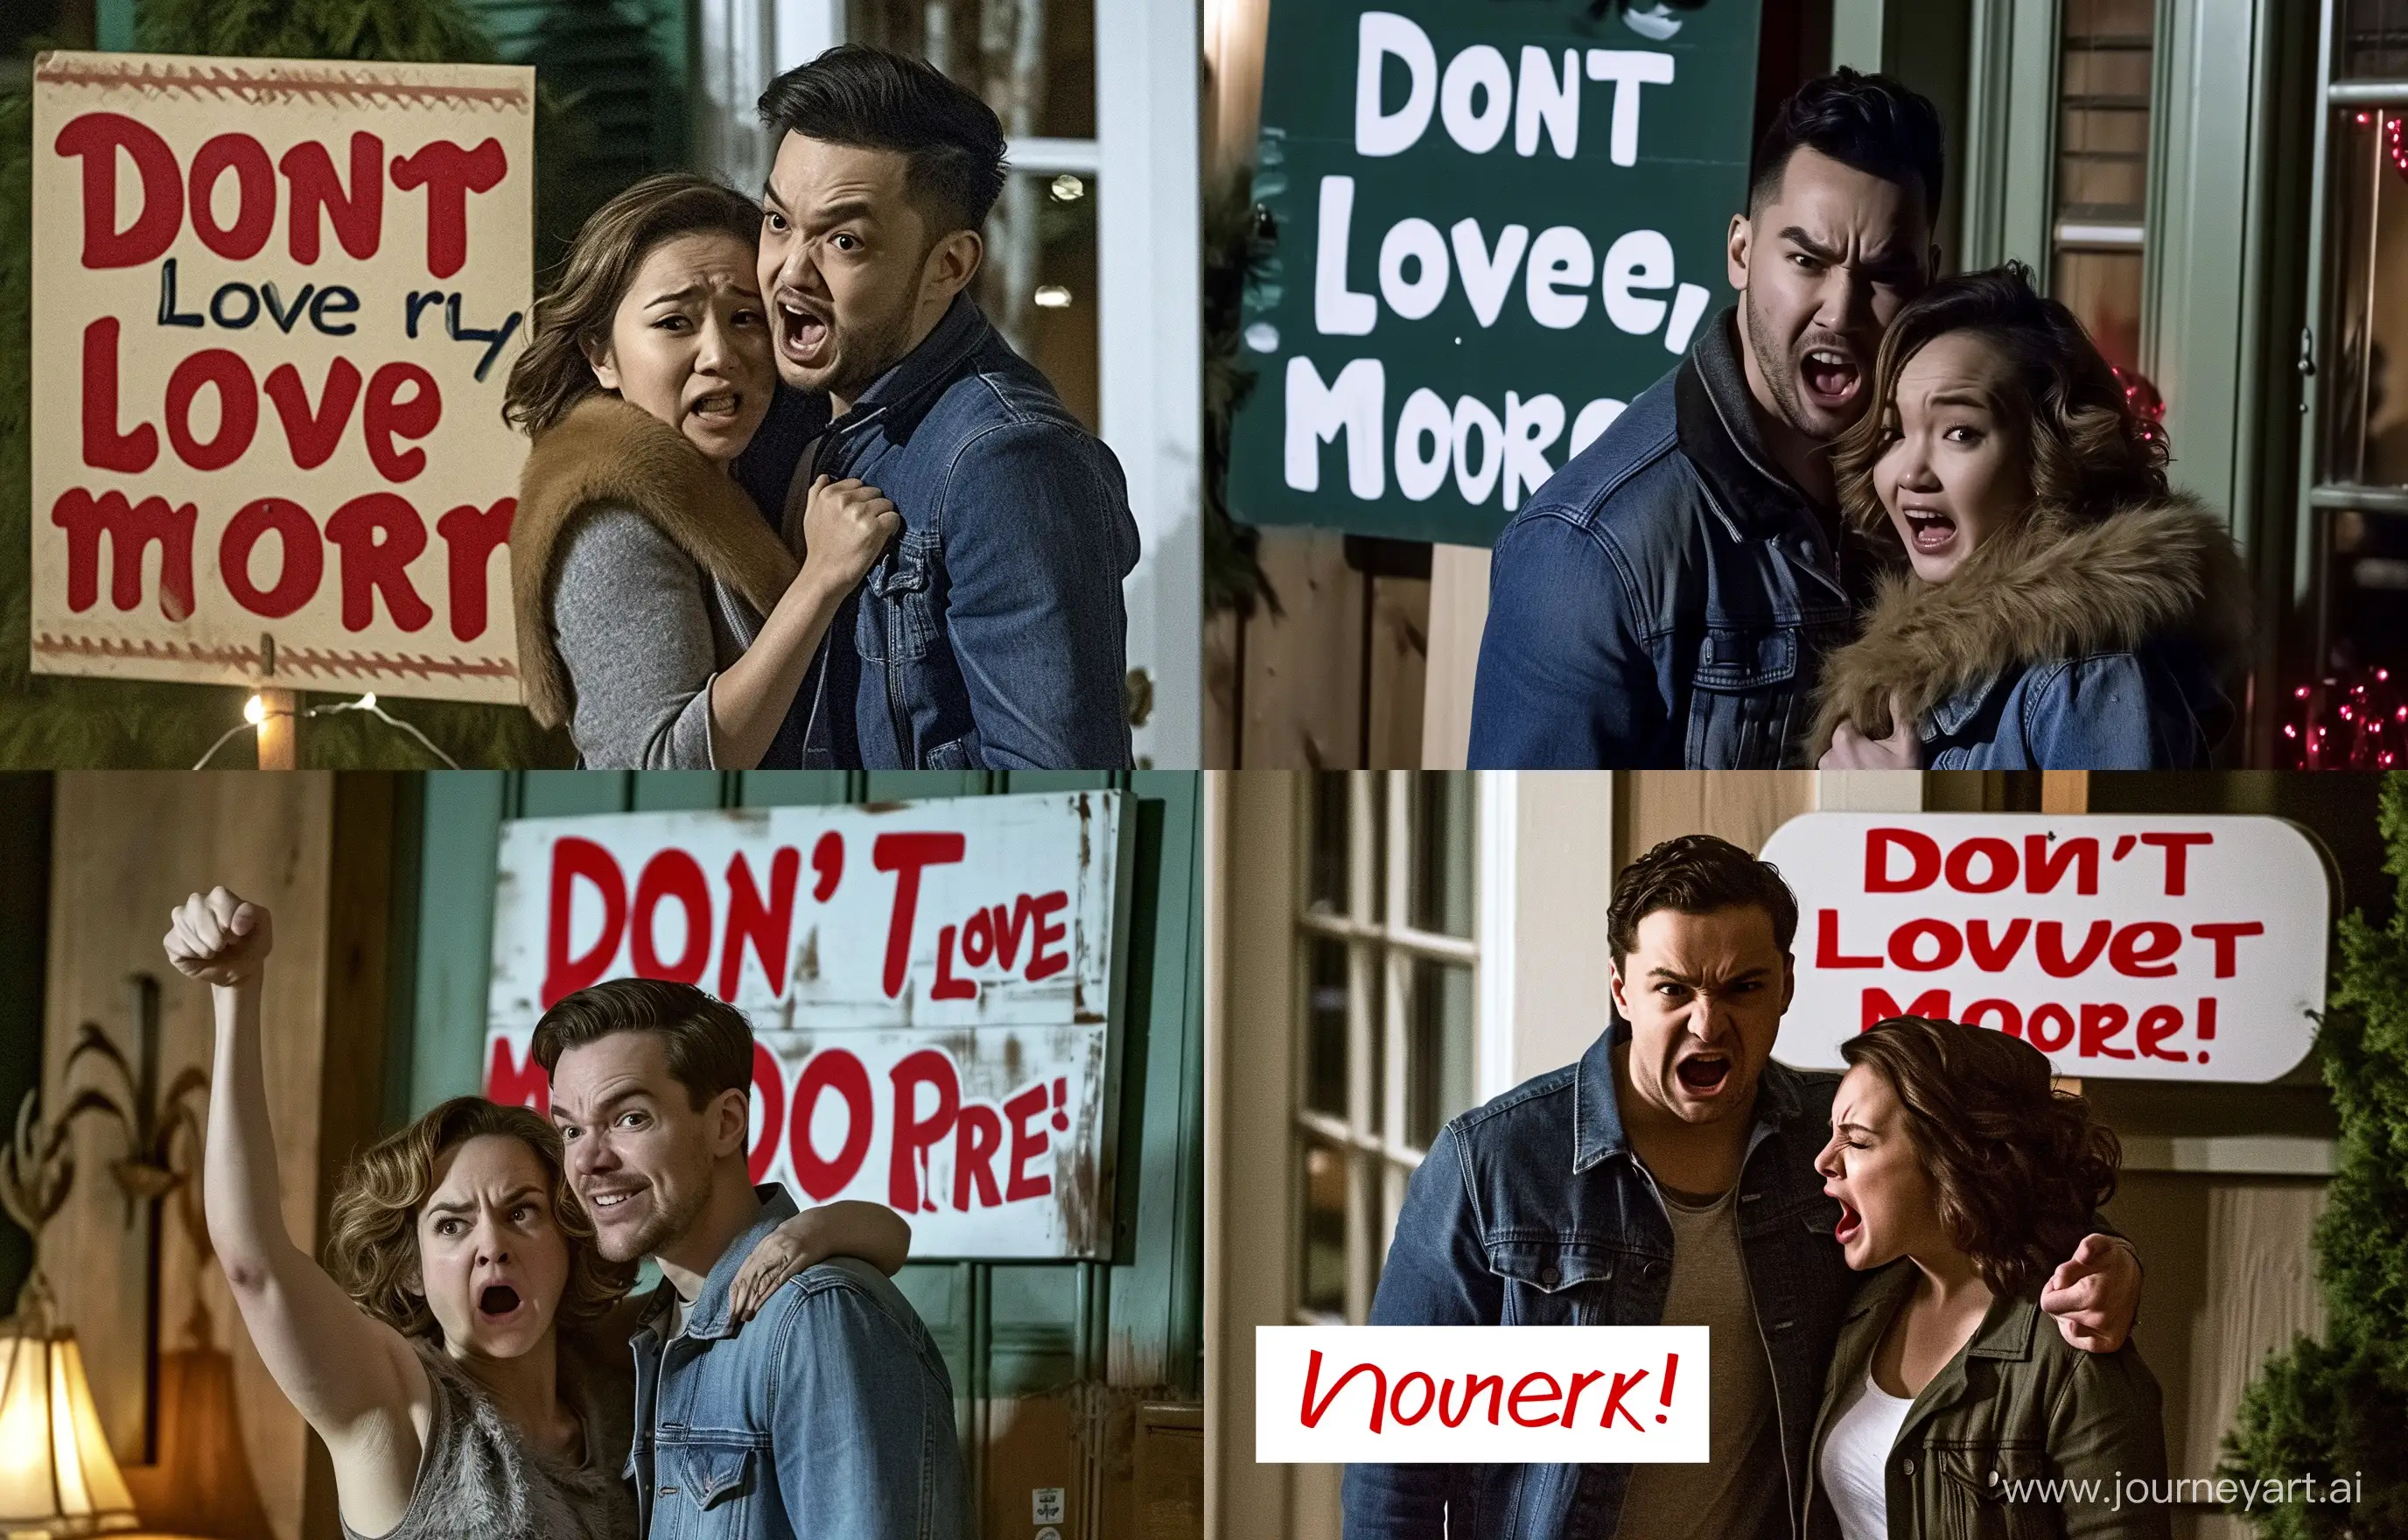 Awkward-Date-at-Parents-House-Couple-Struggling-Amidst-Love-Sign